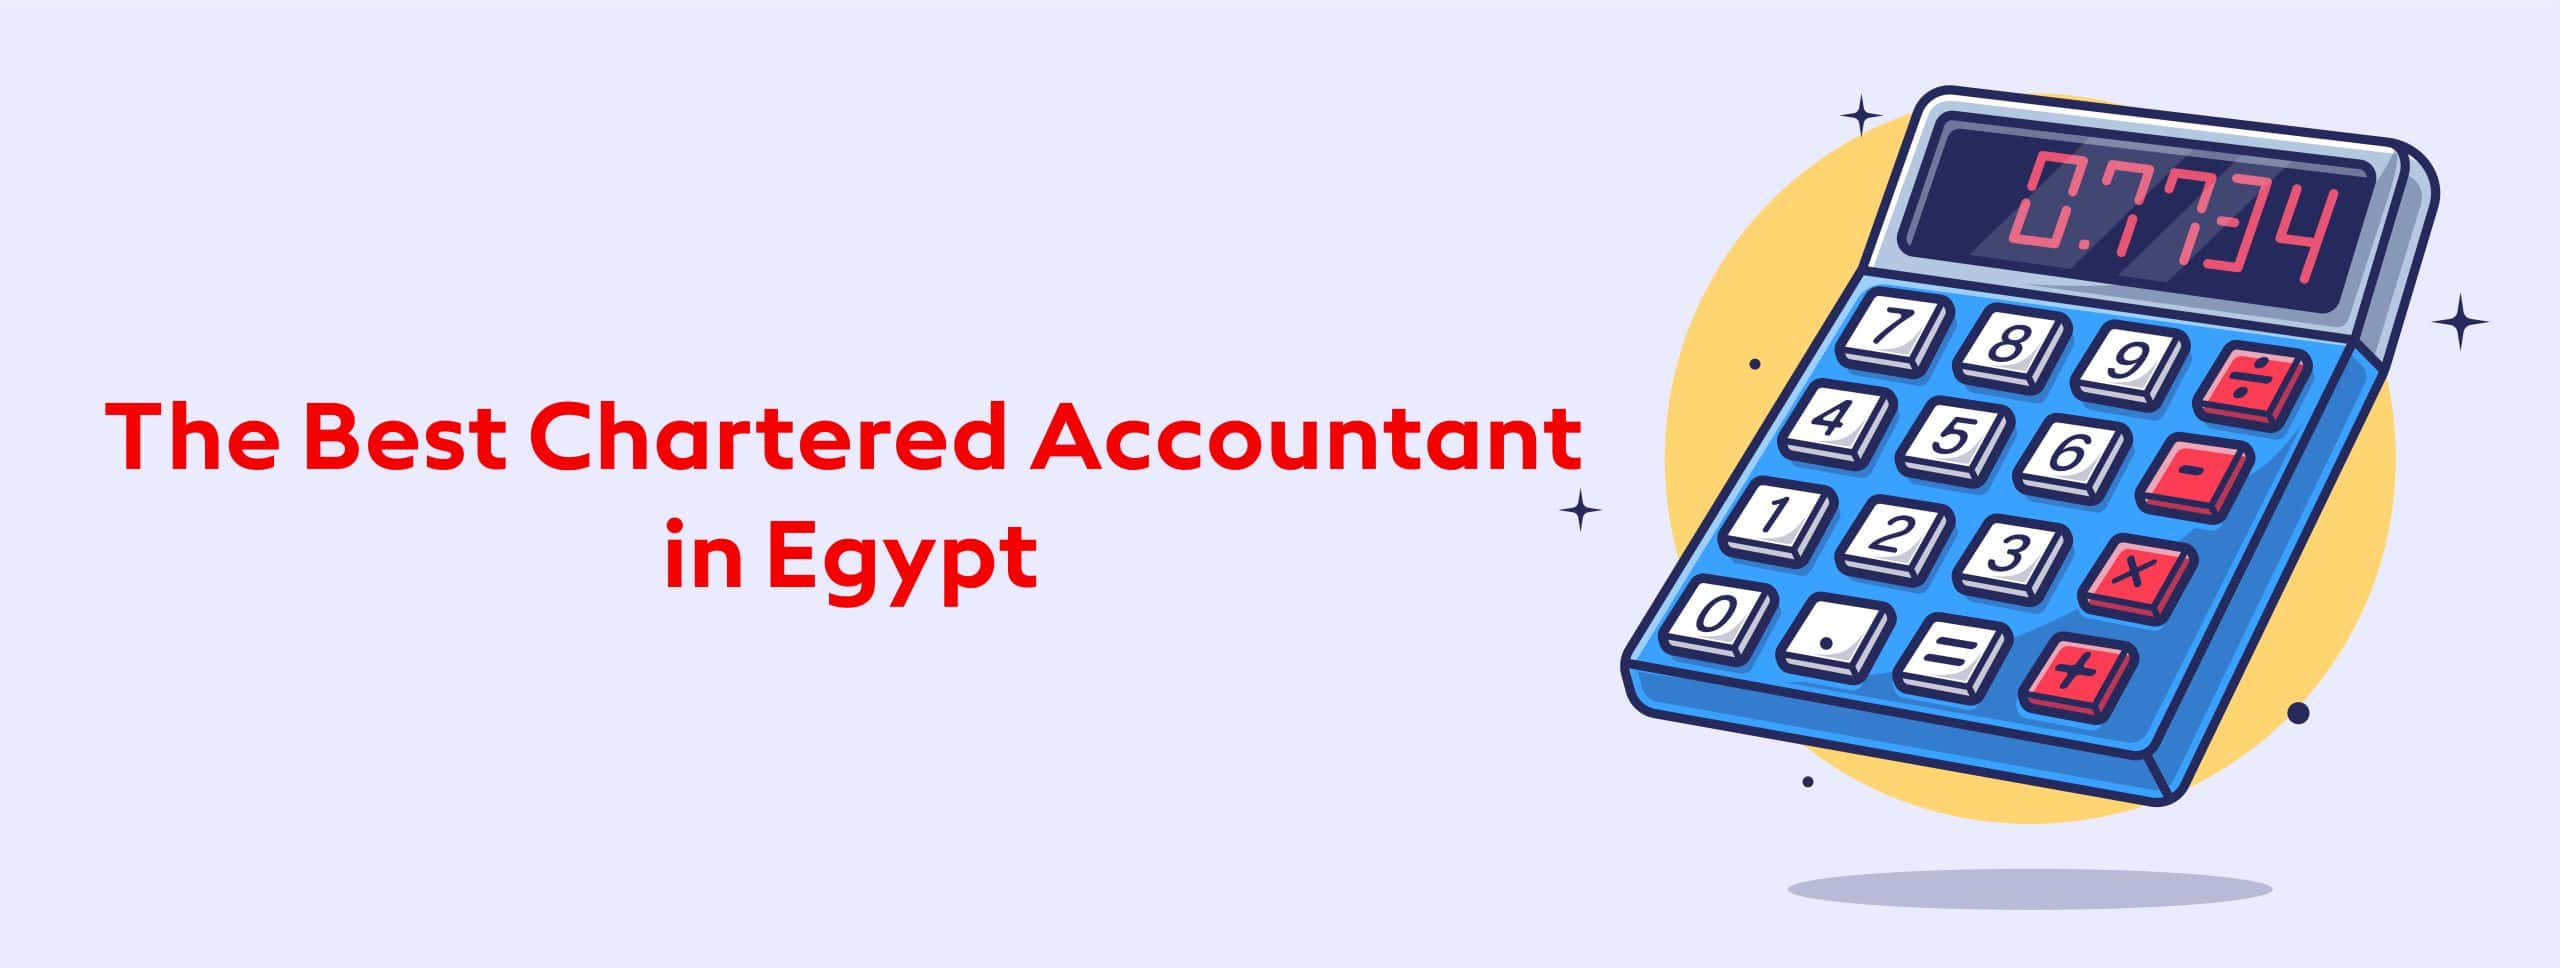 Best Chartered Accountant in Egypt